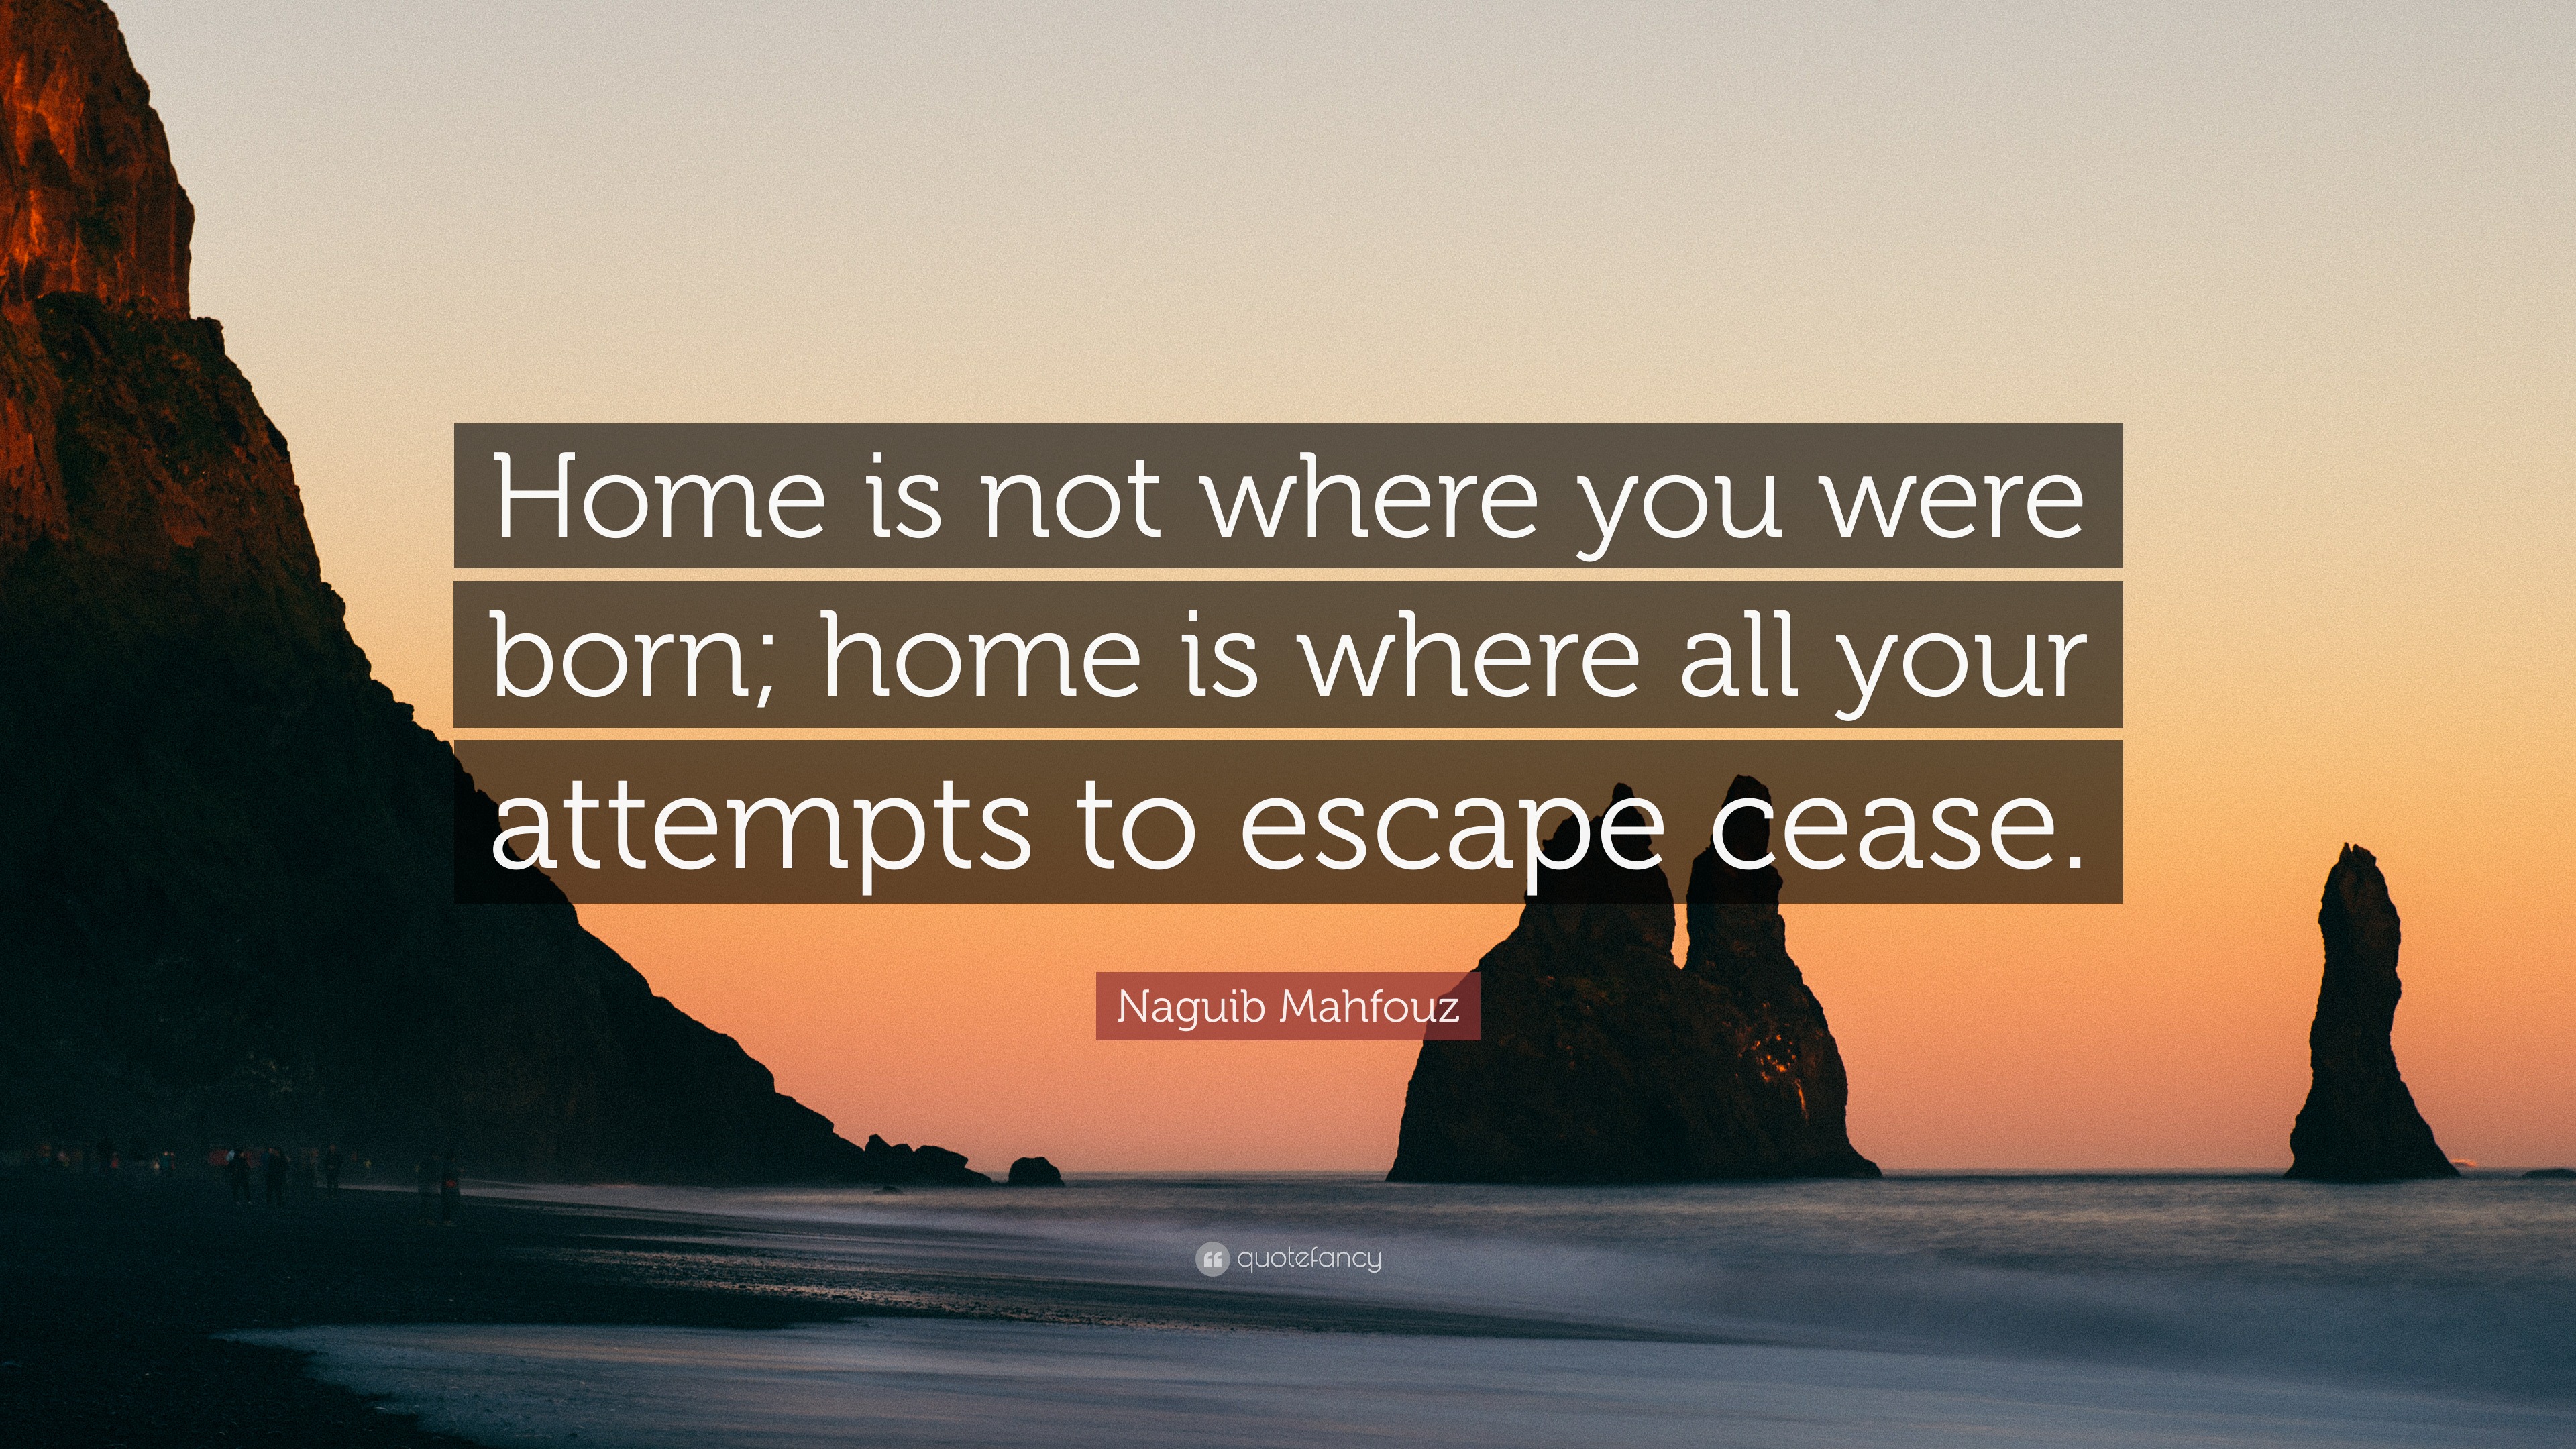 https://quotefancy.com/media/wallpaper/3840x2160/2082687-Naguib-Mahfouz-Quote-Home-is-not-where-you-were-born-home-is-where.jpg